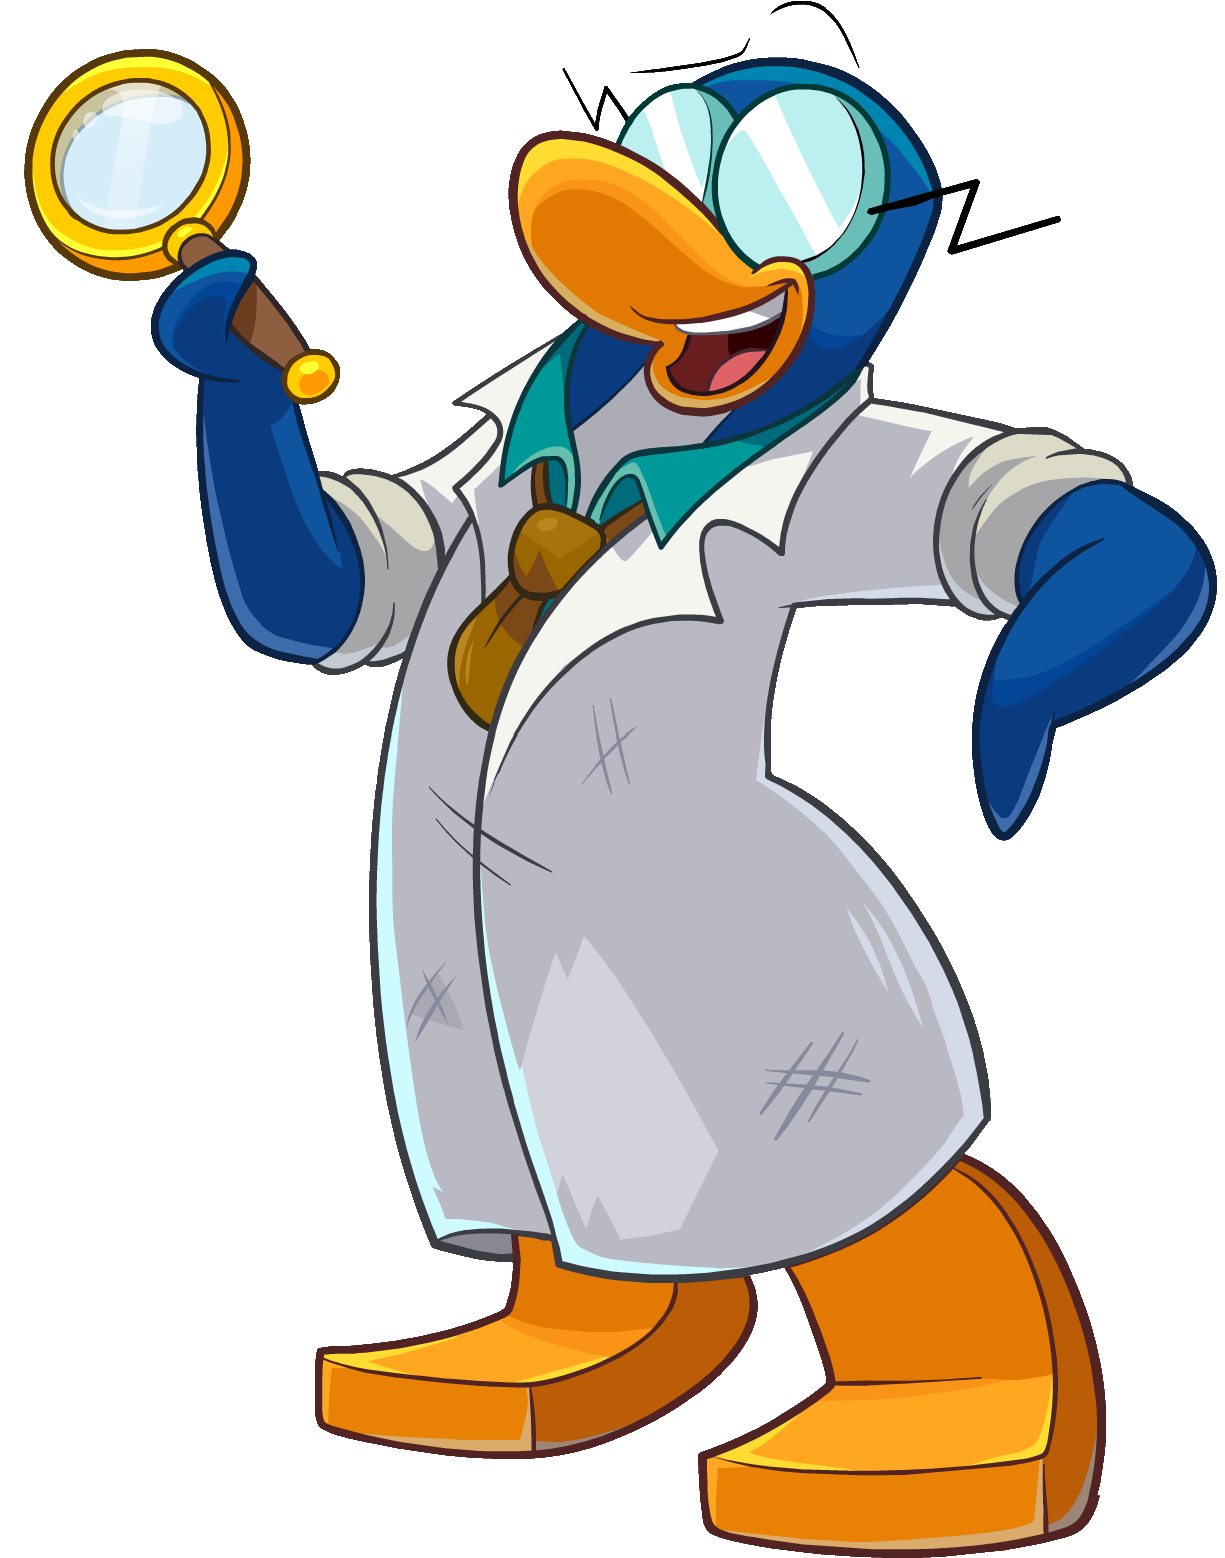 Club Penguin Island to Shutting Down by year end